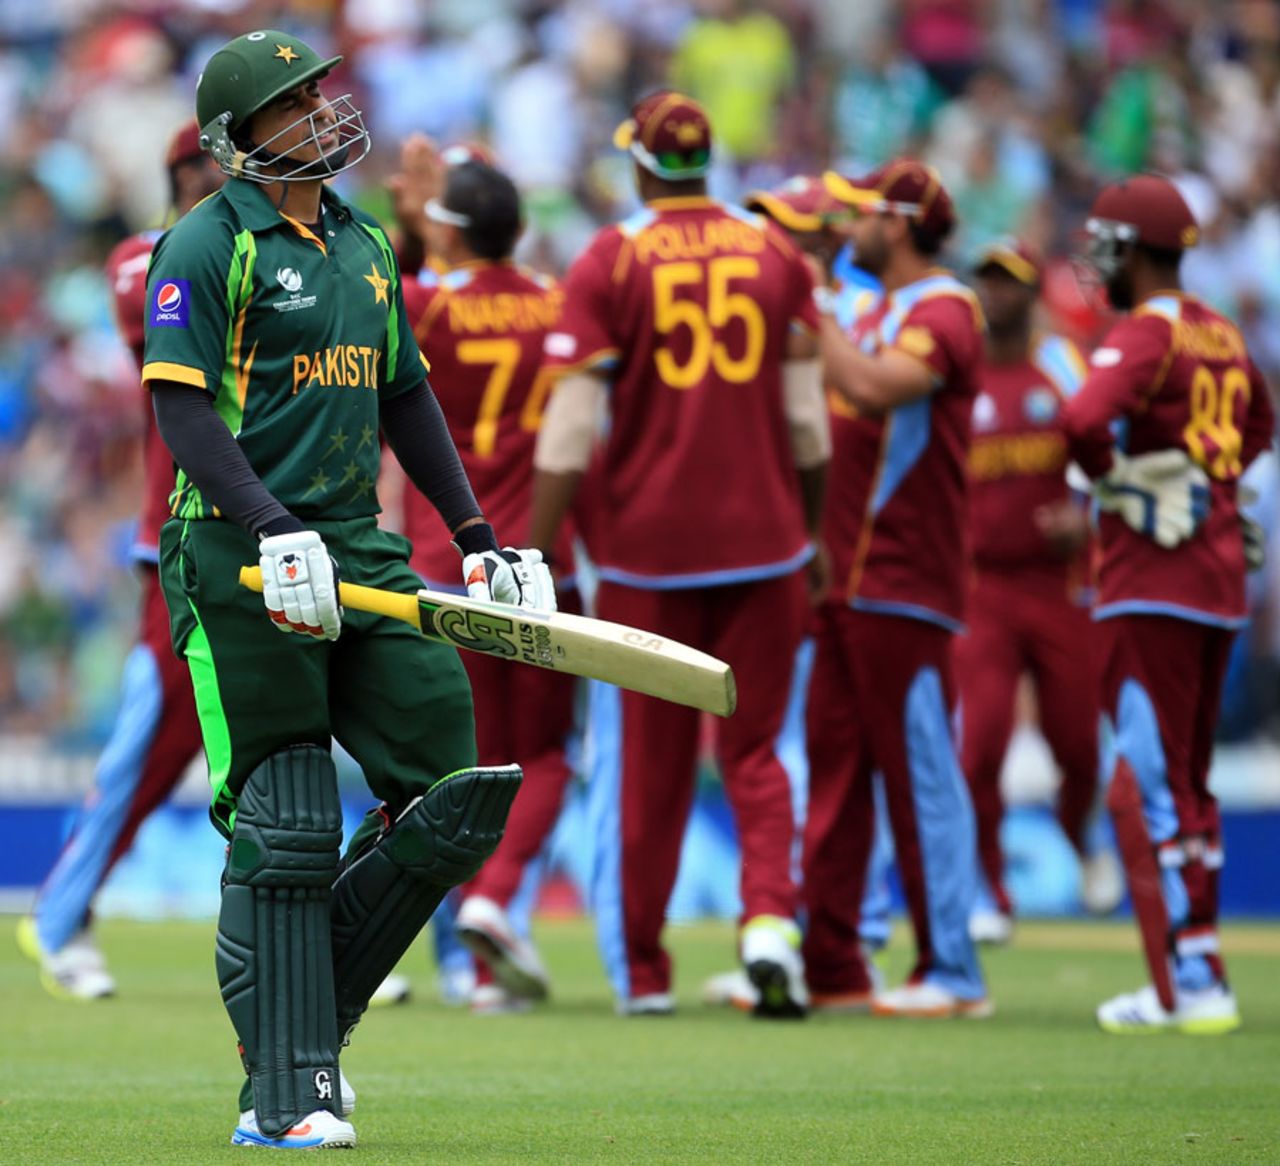 Nasir Jamshed grimaces after being given out, West Indies v Pakistan, Champions Trophy, Group B, The Oval, June 7, 2013